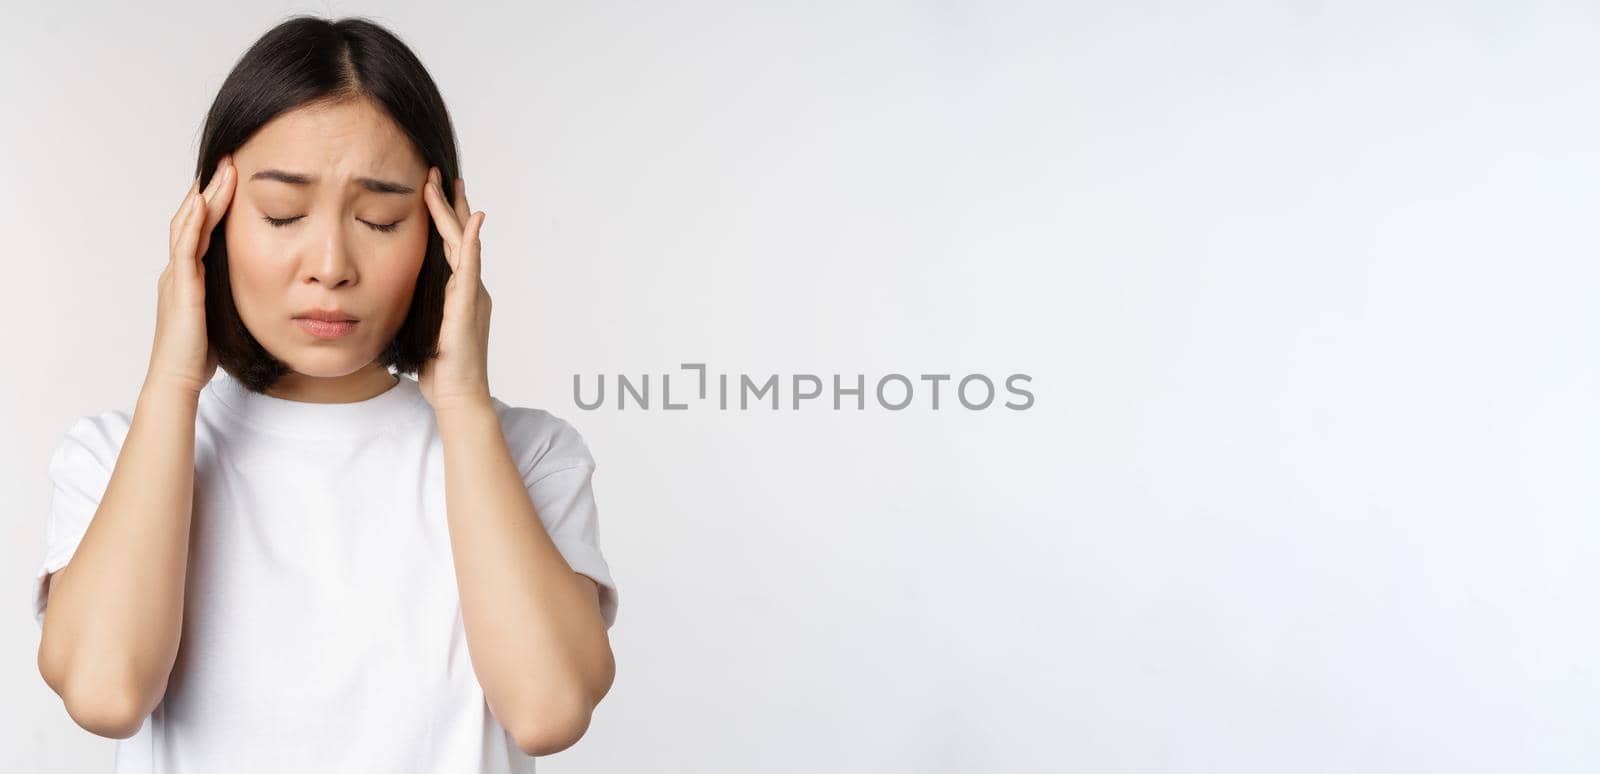 Portrait of asian girl feeling headache, migraine or being ill, standing in white t-shirt over white background. Copy space